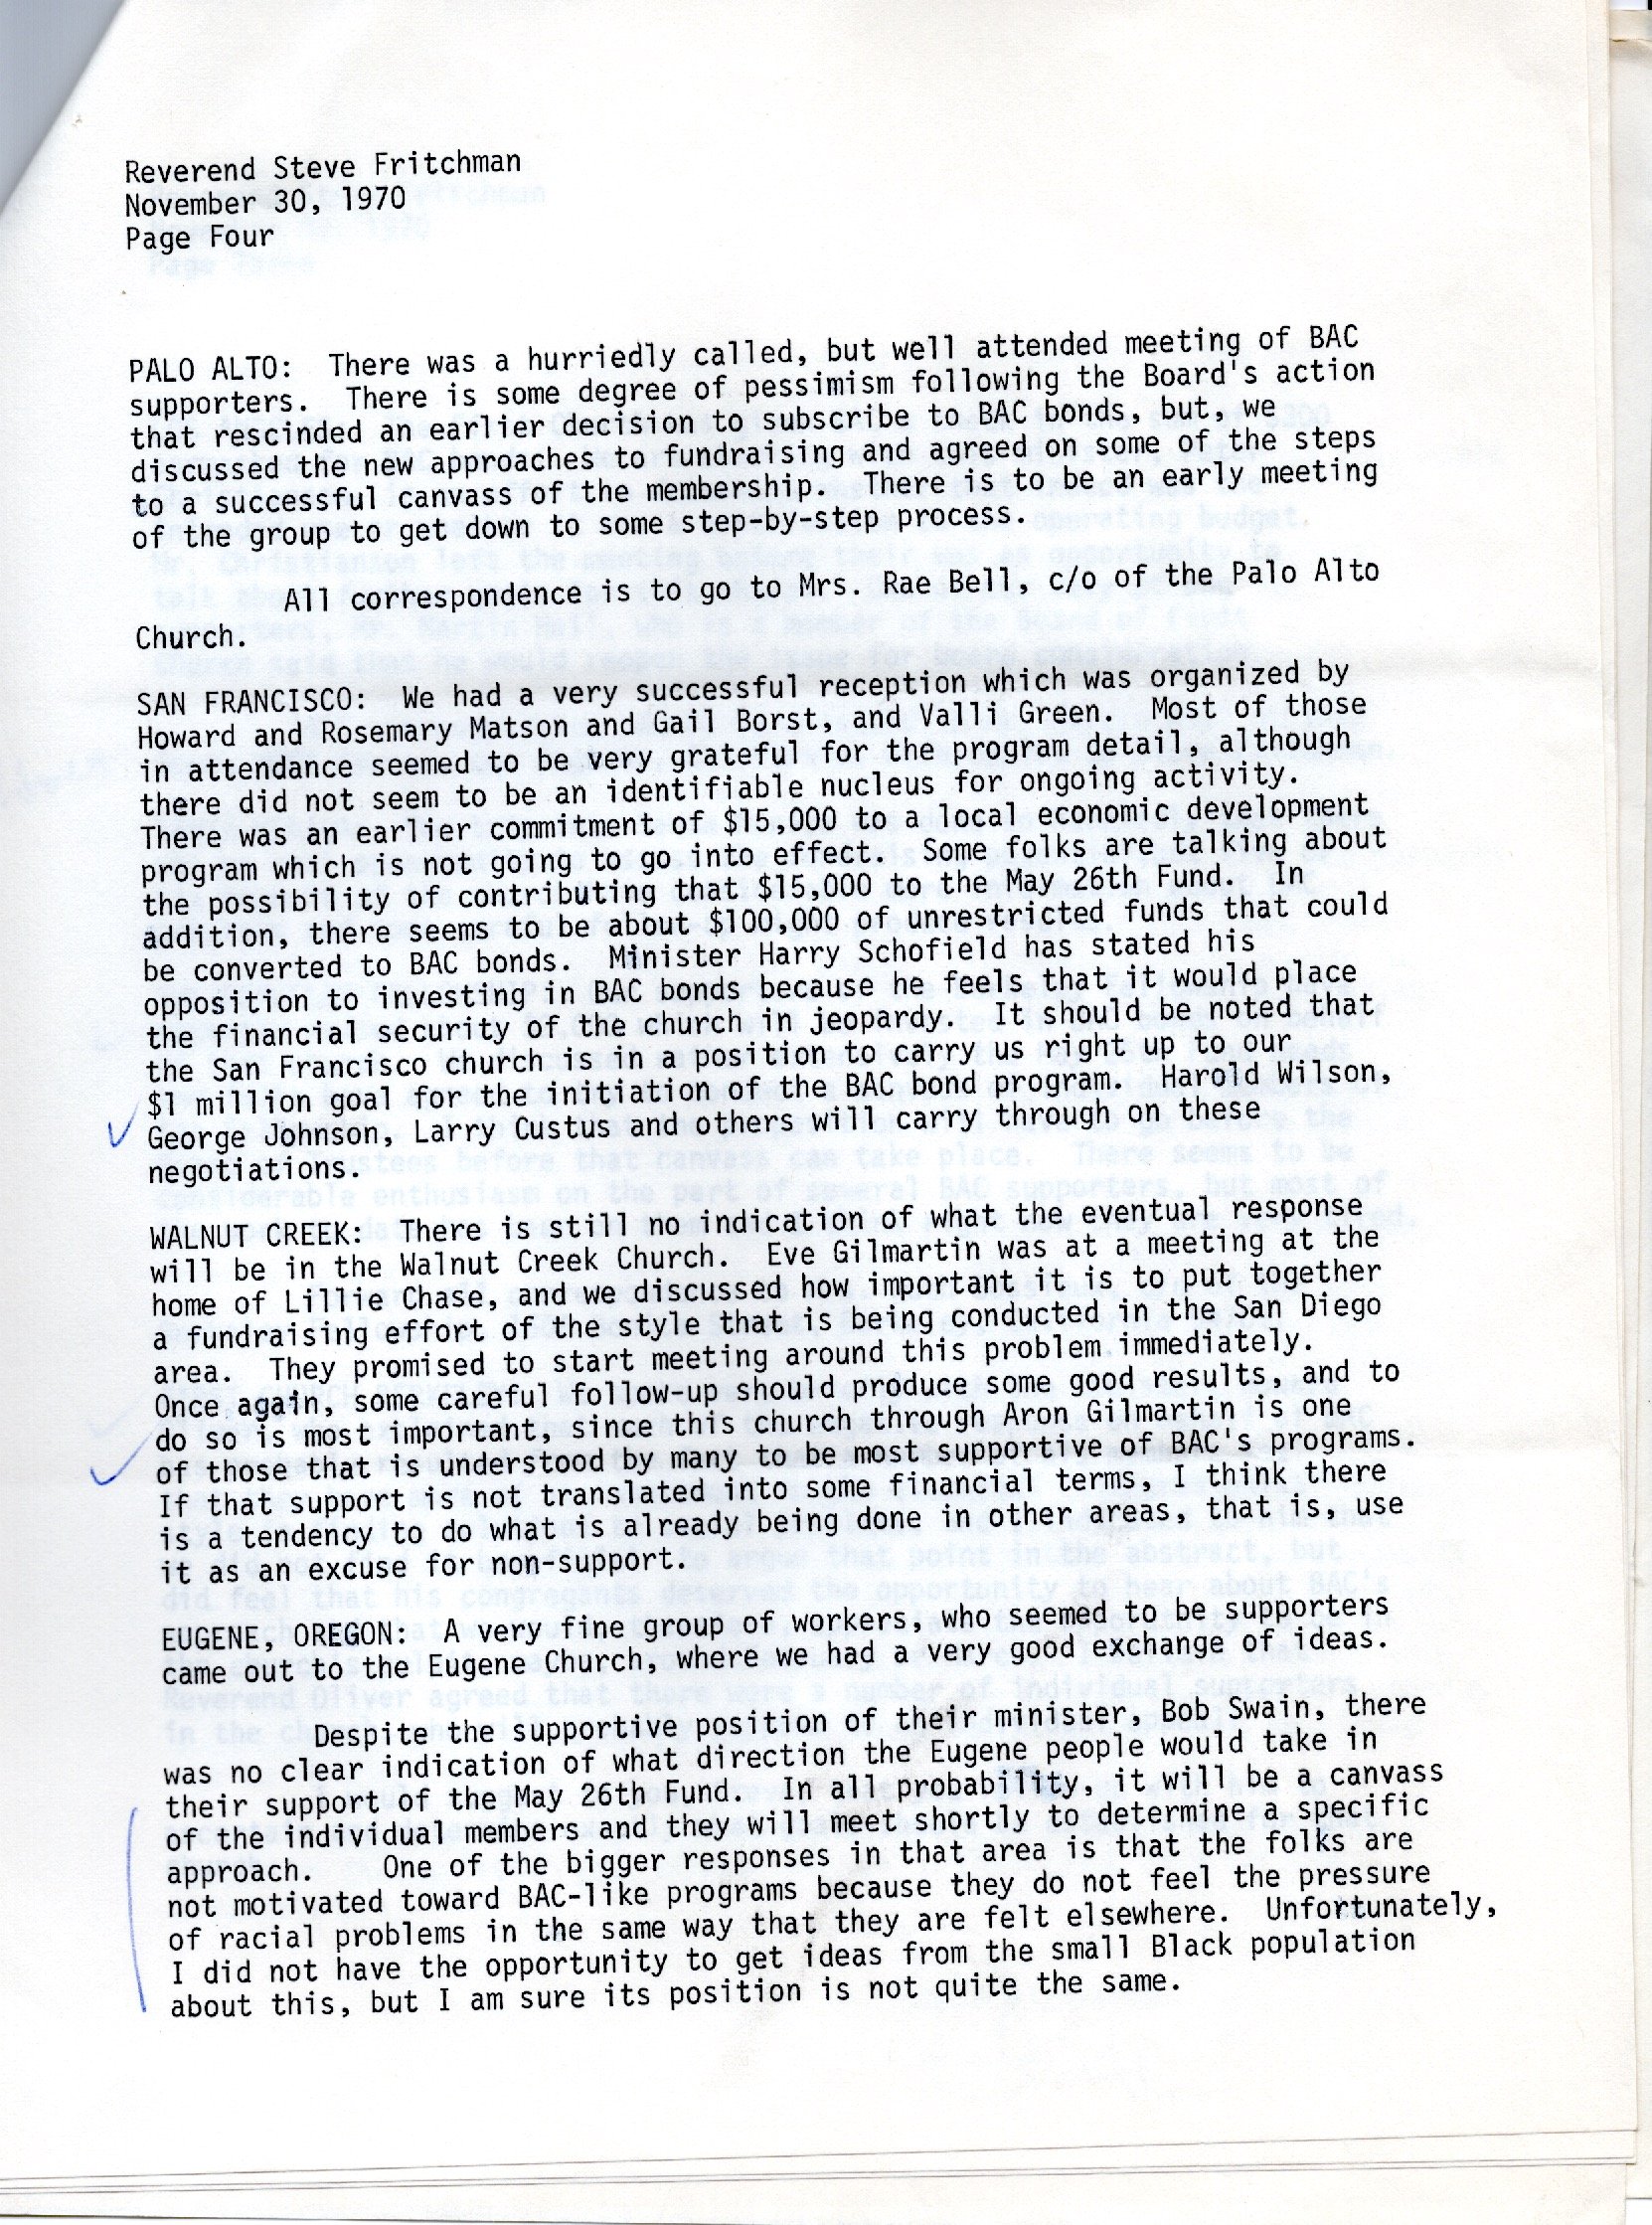 1970.11.30 memo from Dick Traylor to Fritchman_0004.jpg